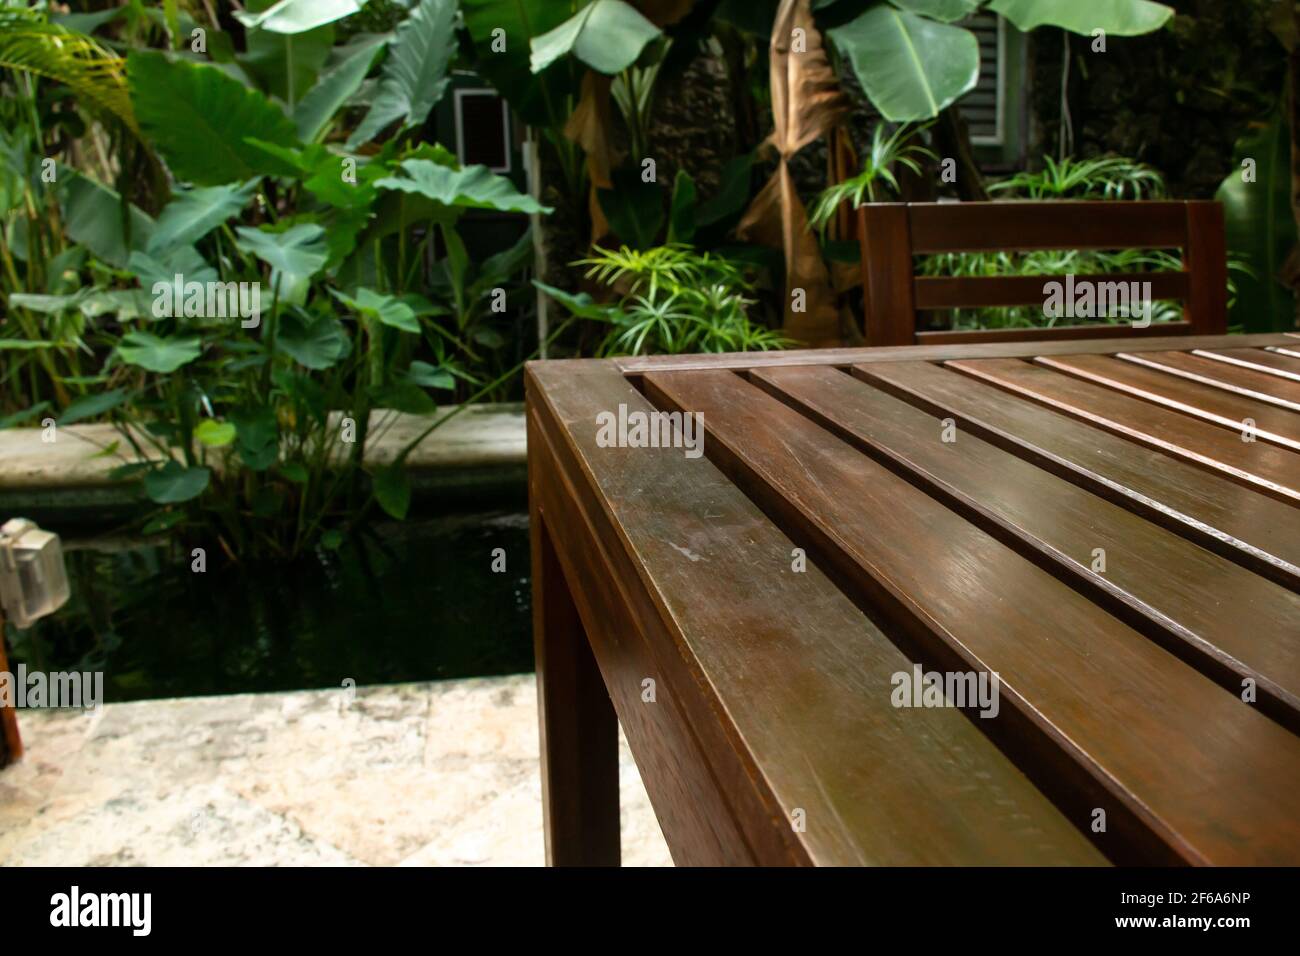 The corner of a mahogany wood slat table and a matching chair on a veranda surrounded by a moat and thick jungle foliage in the Caribbean. Stock Photo